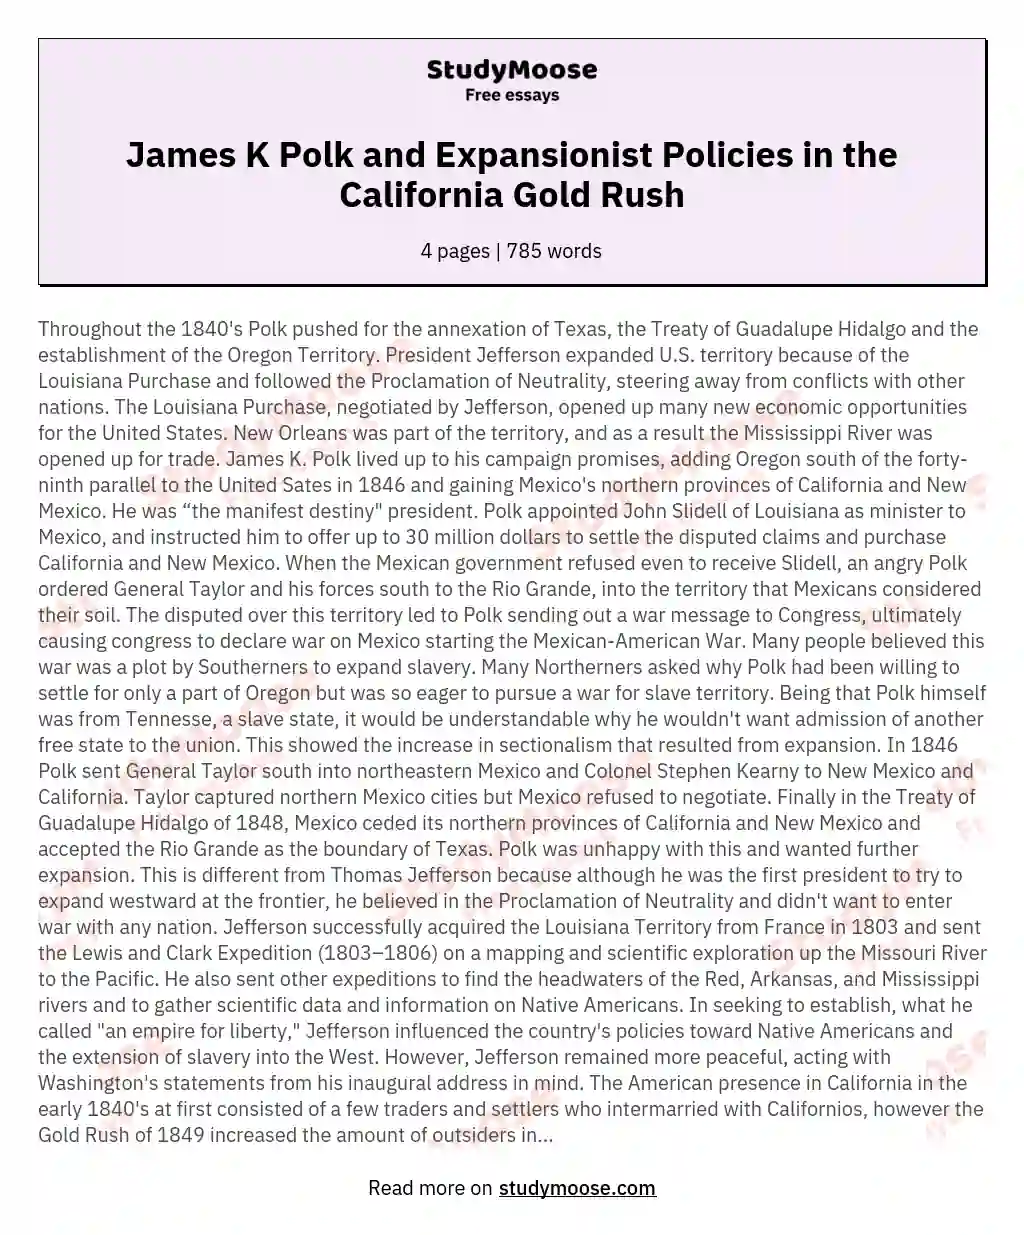 James K Polk and Expansionist Policies in the California Gold Rush essay